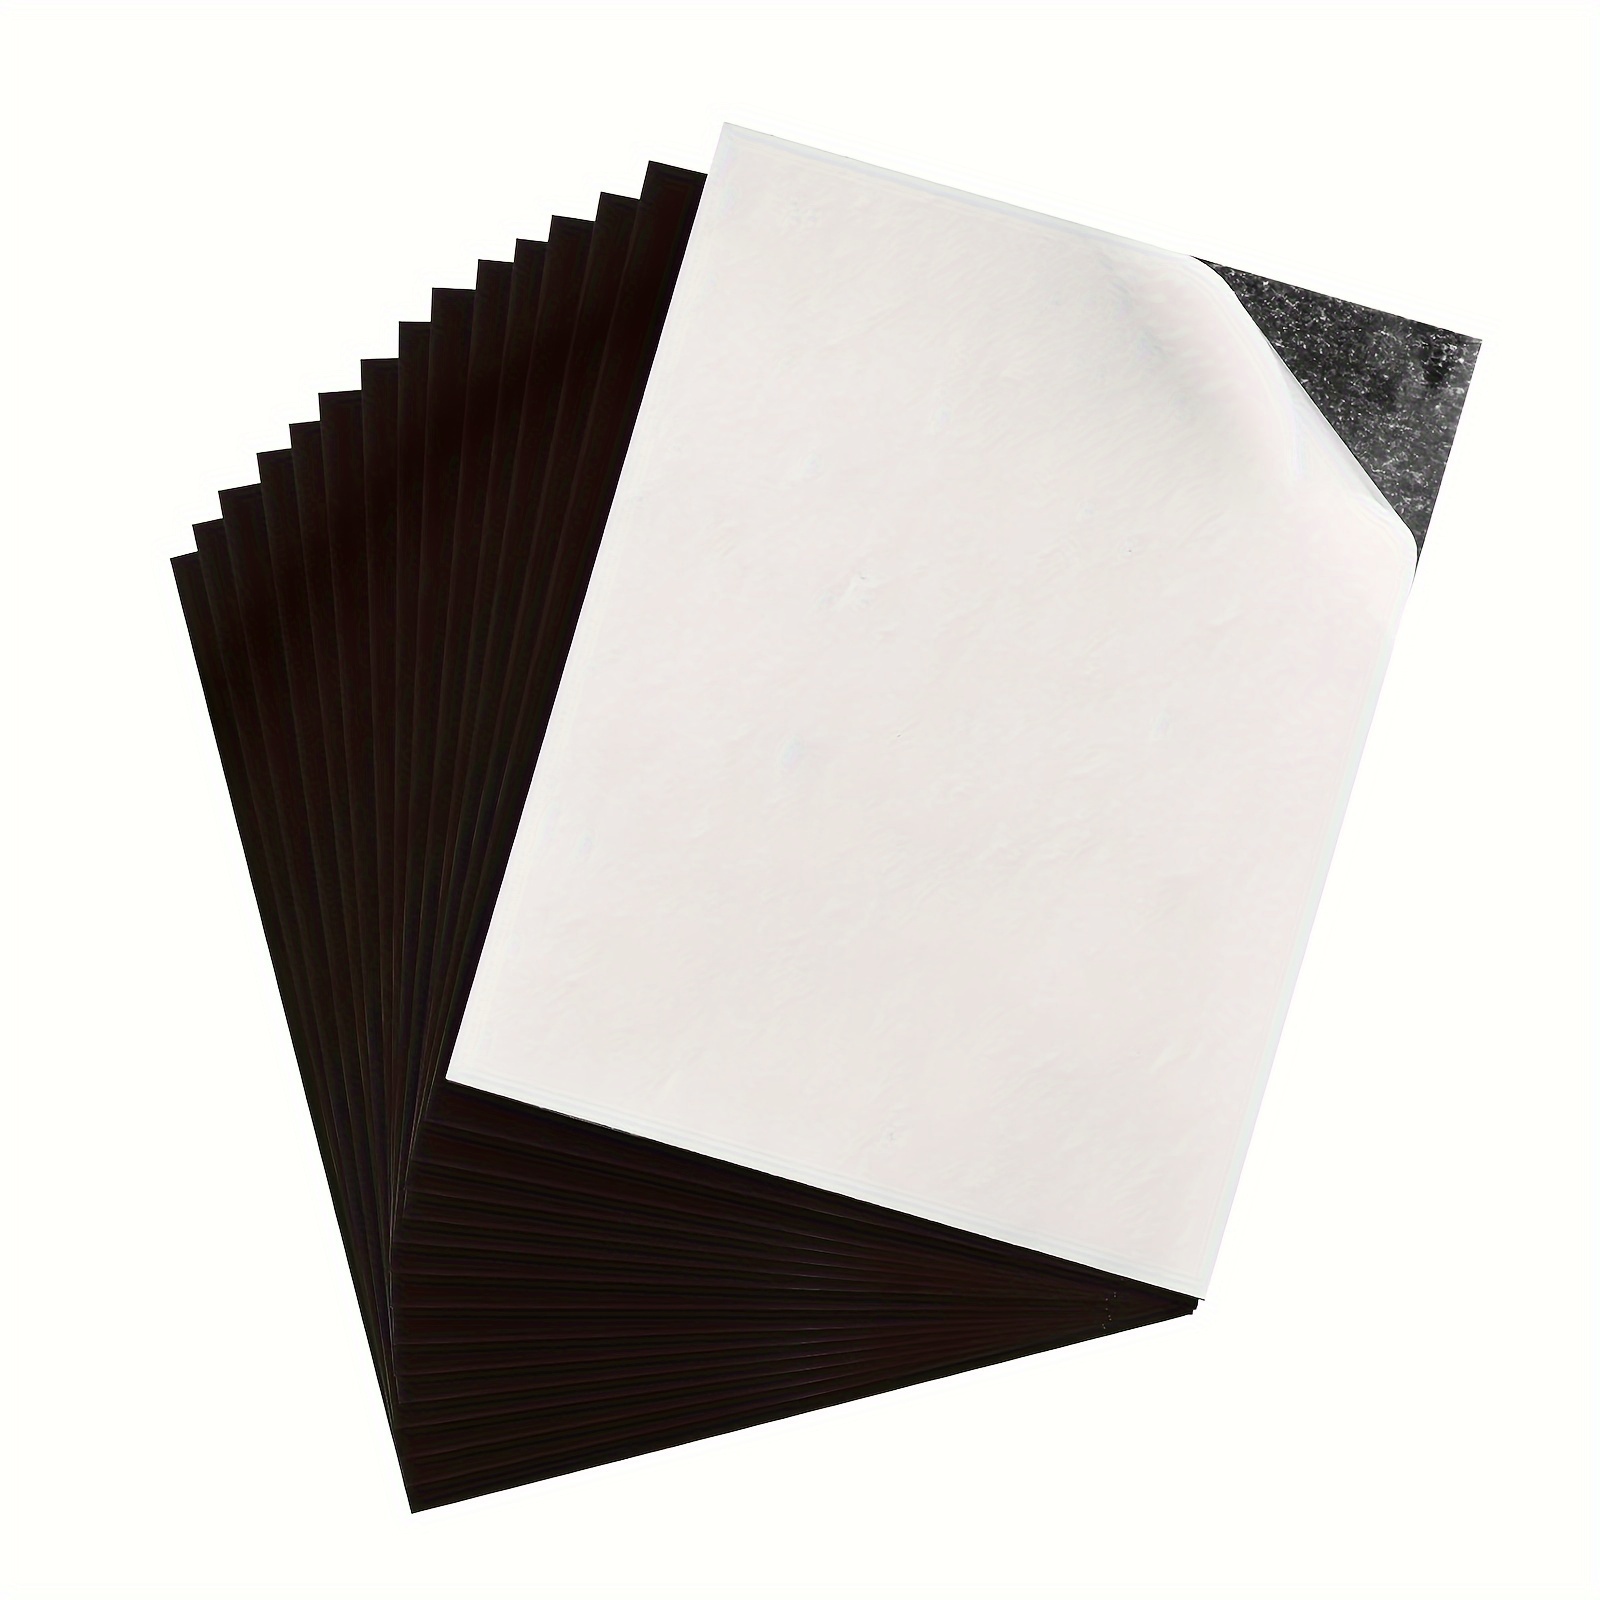 

5-piece A4 Size 8.5" X 11" Magnetic Sheets With Adhesive Backing - Flexible, Peel & Stick Contact Paper Magnets